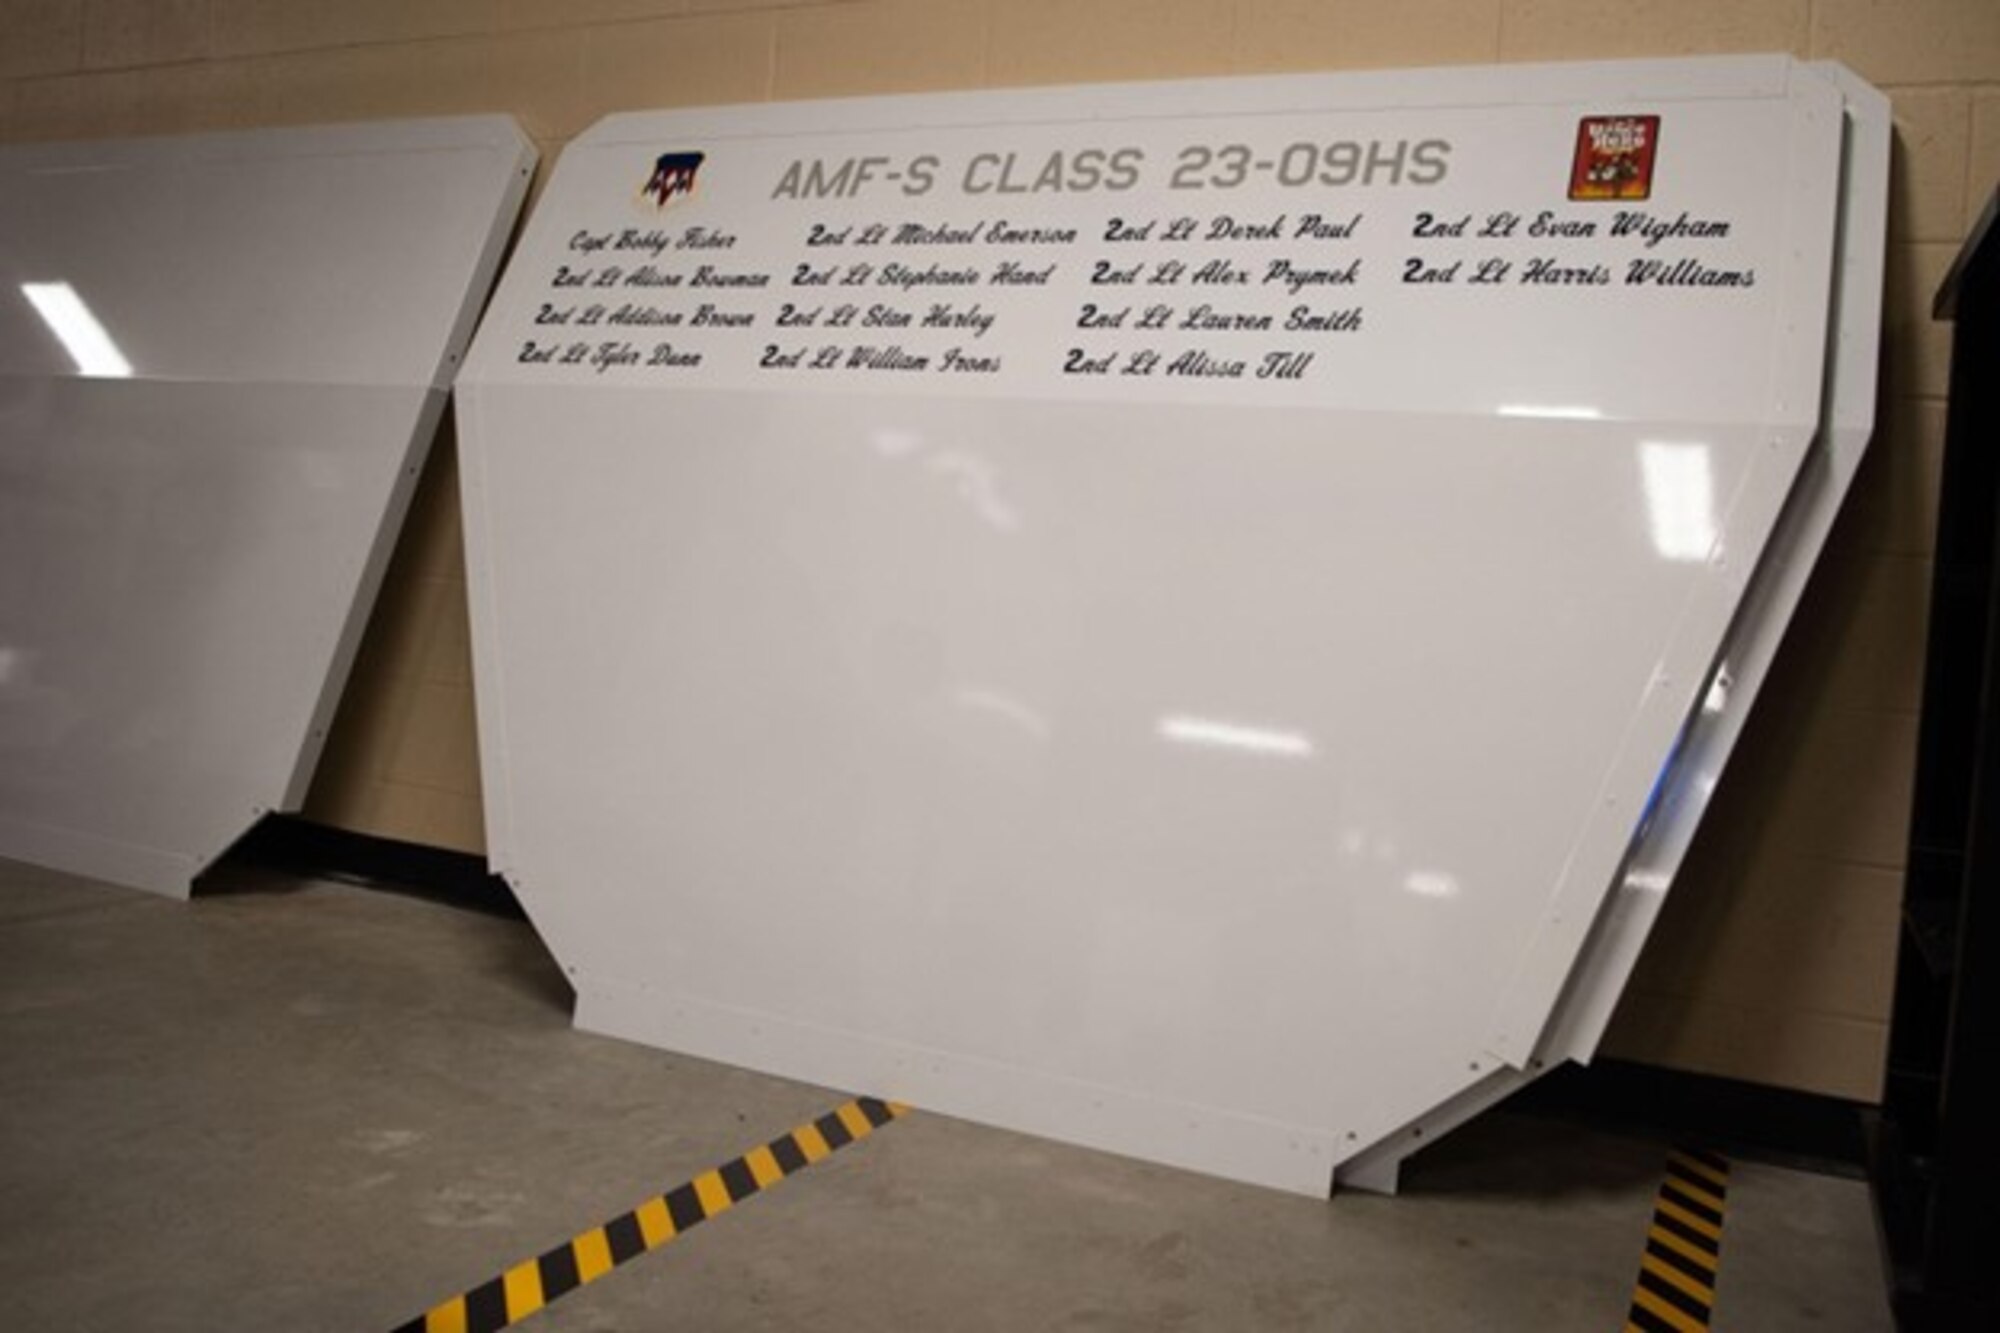 Names of each student on a nose cone of a aircraft from the first AMF-S class at Vance